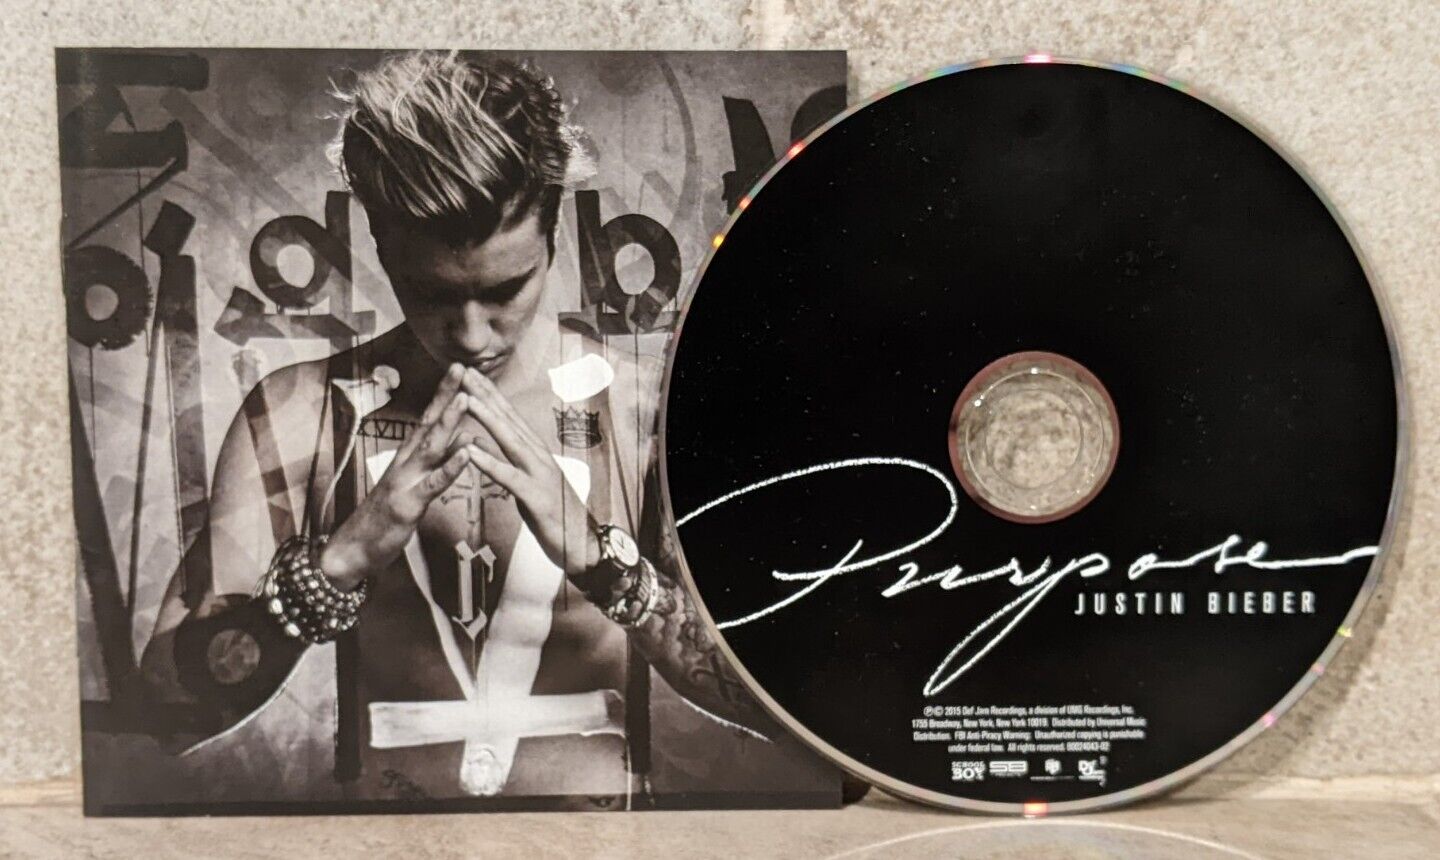 Justin Bieber - Purpose CD (Disc & Cover Only) 2015 Def Jam 